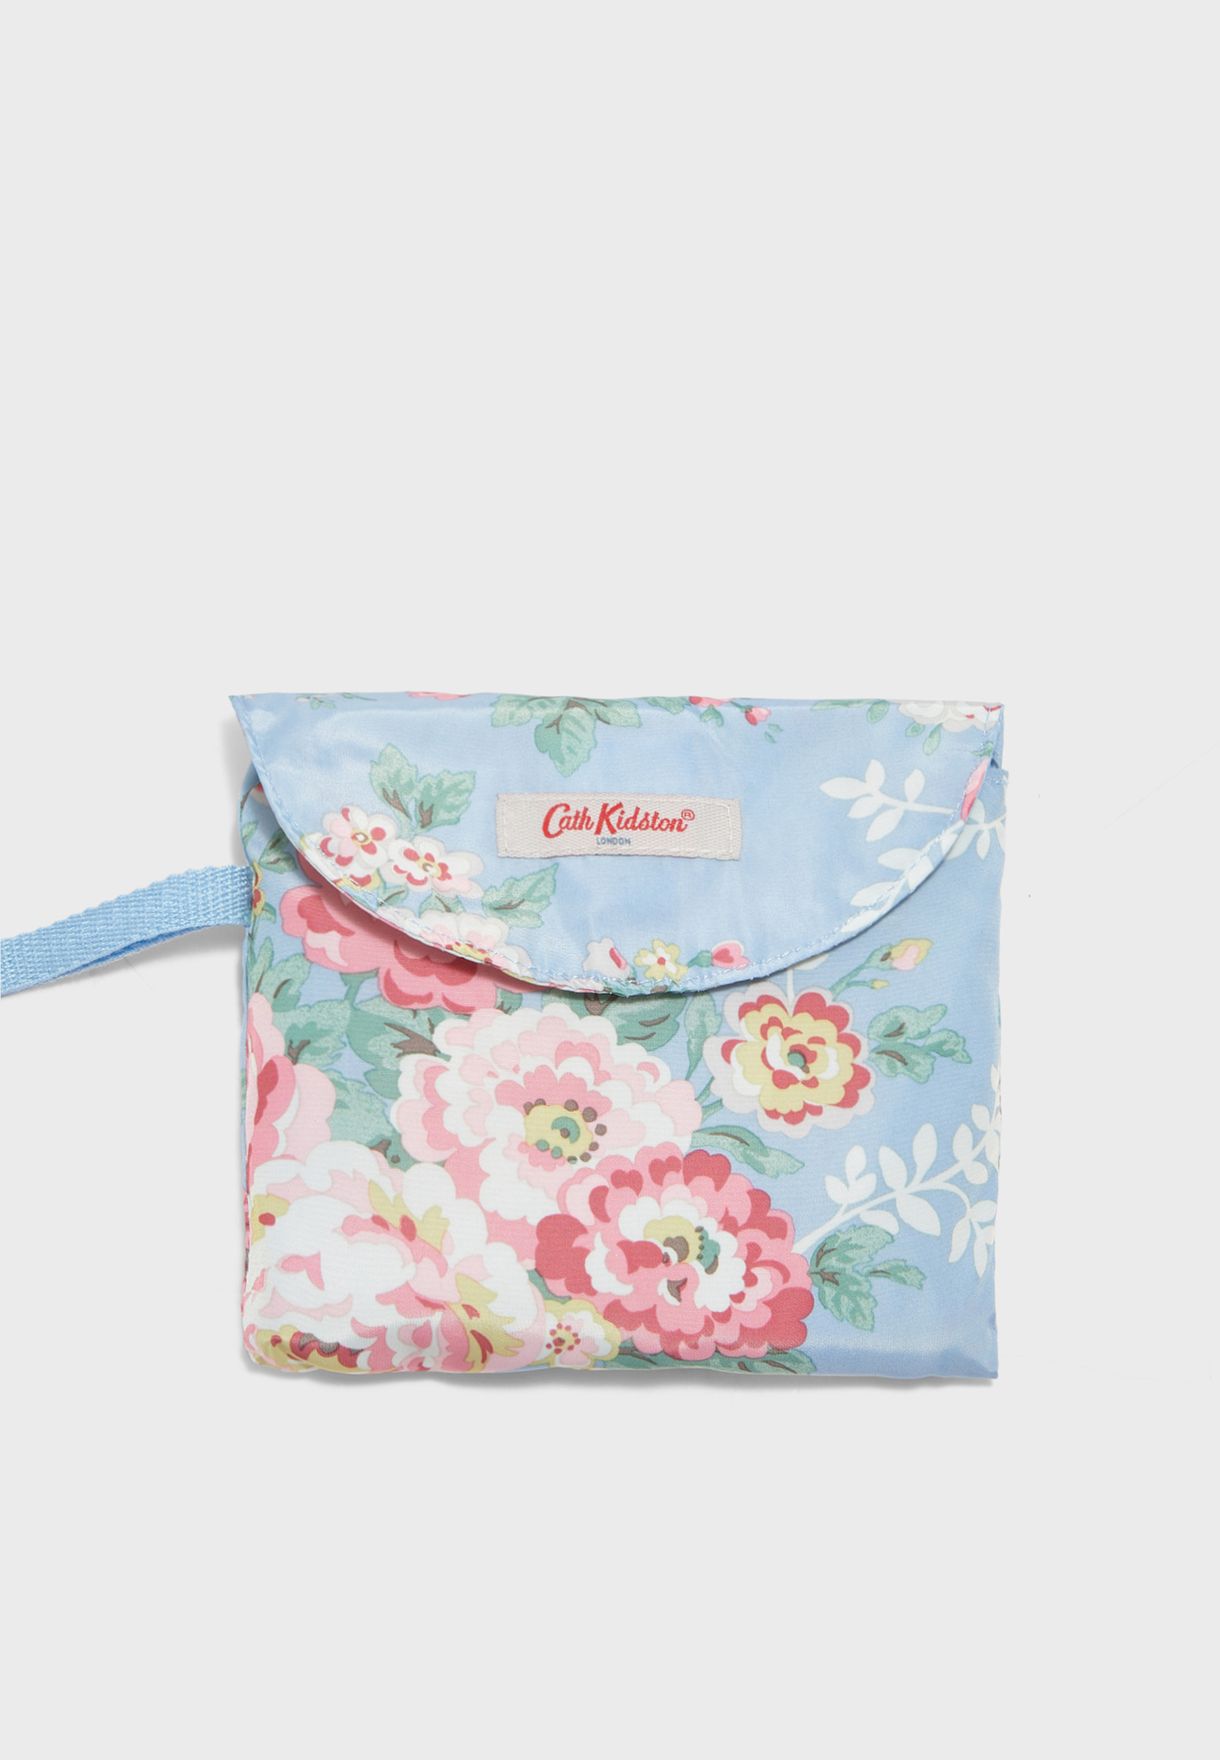 cath kidston candy flowers